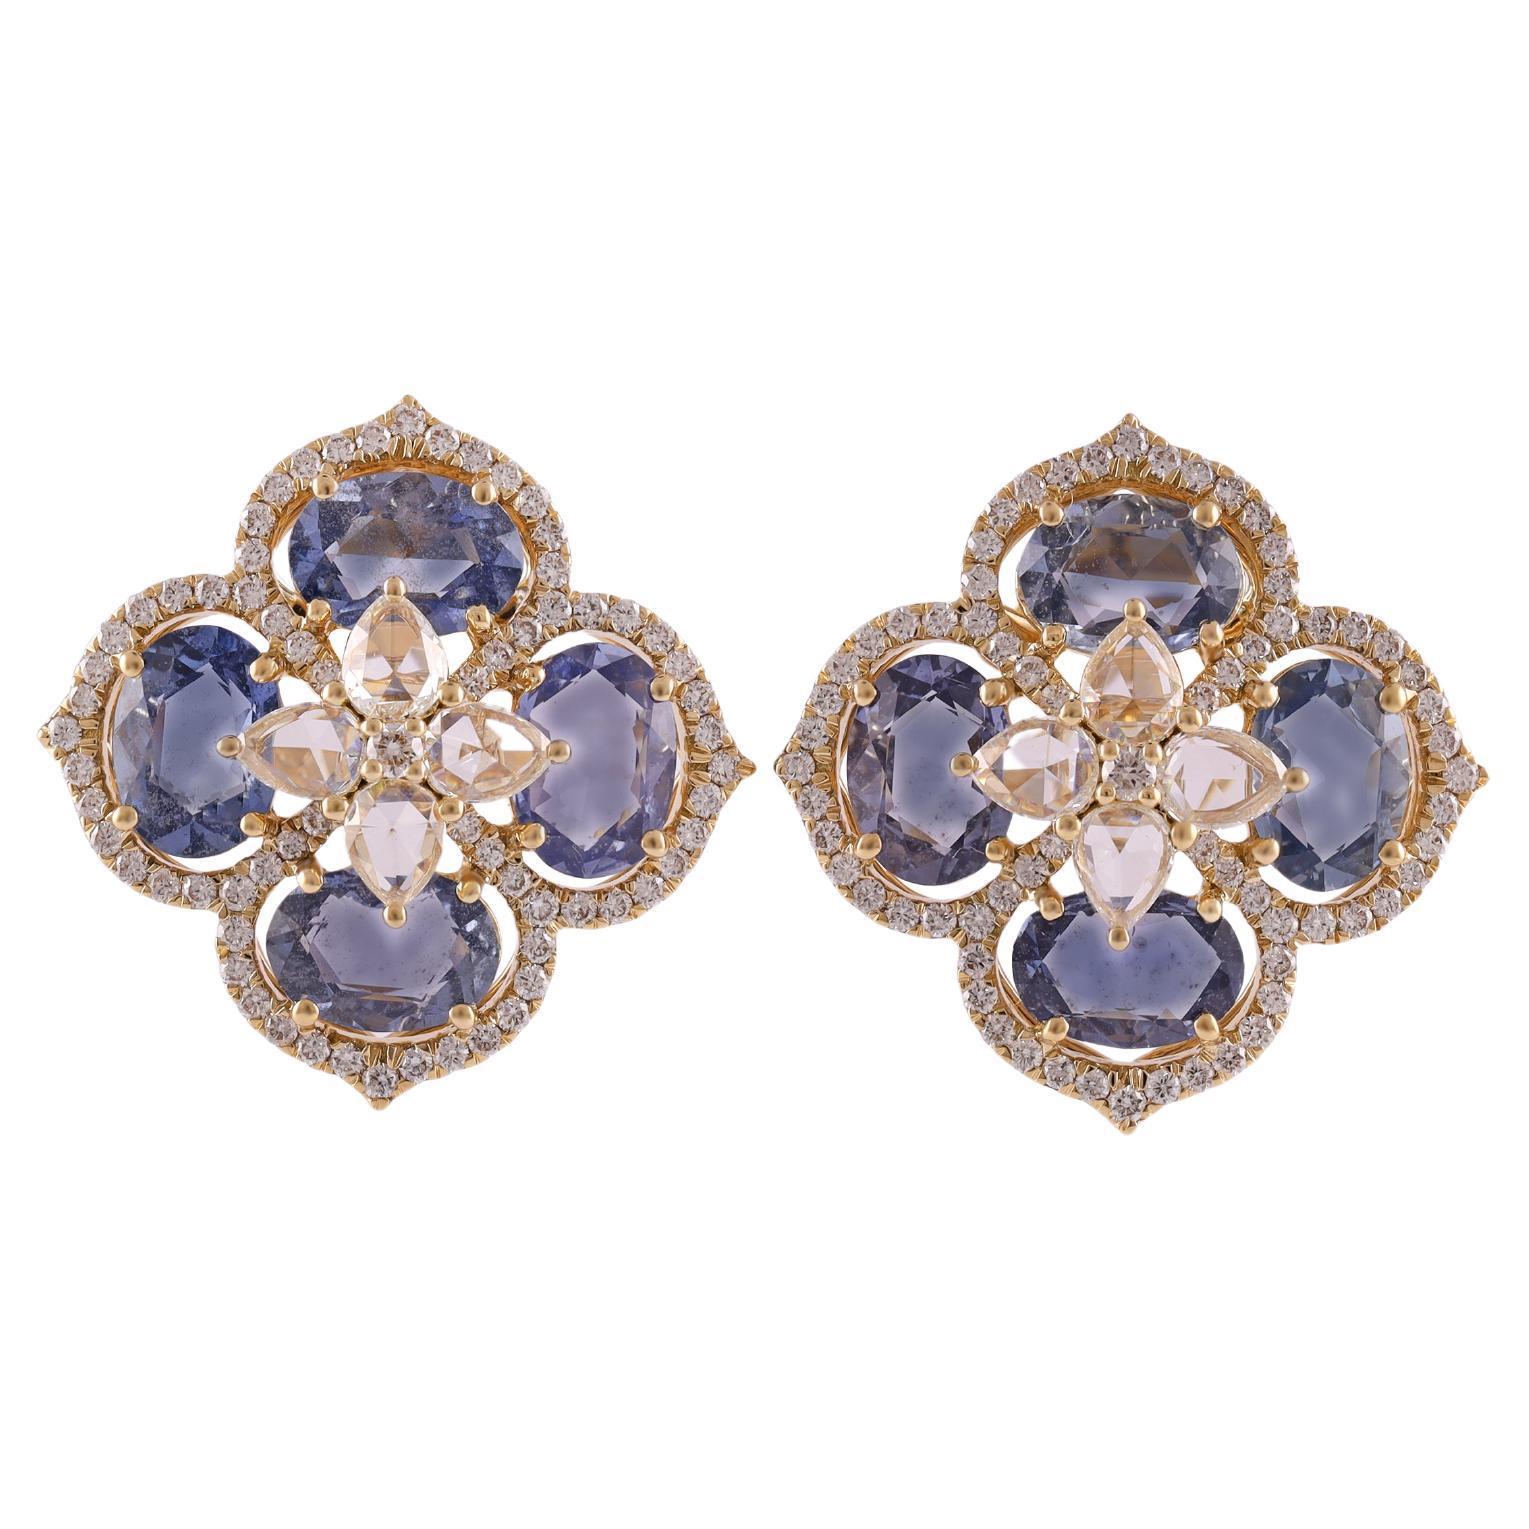 6.09 Carat  Blue Sapphire Earrings in Yellow Gold with Diamonds.  For Sale